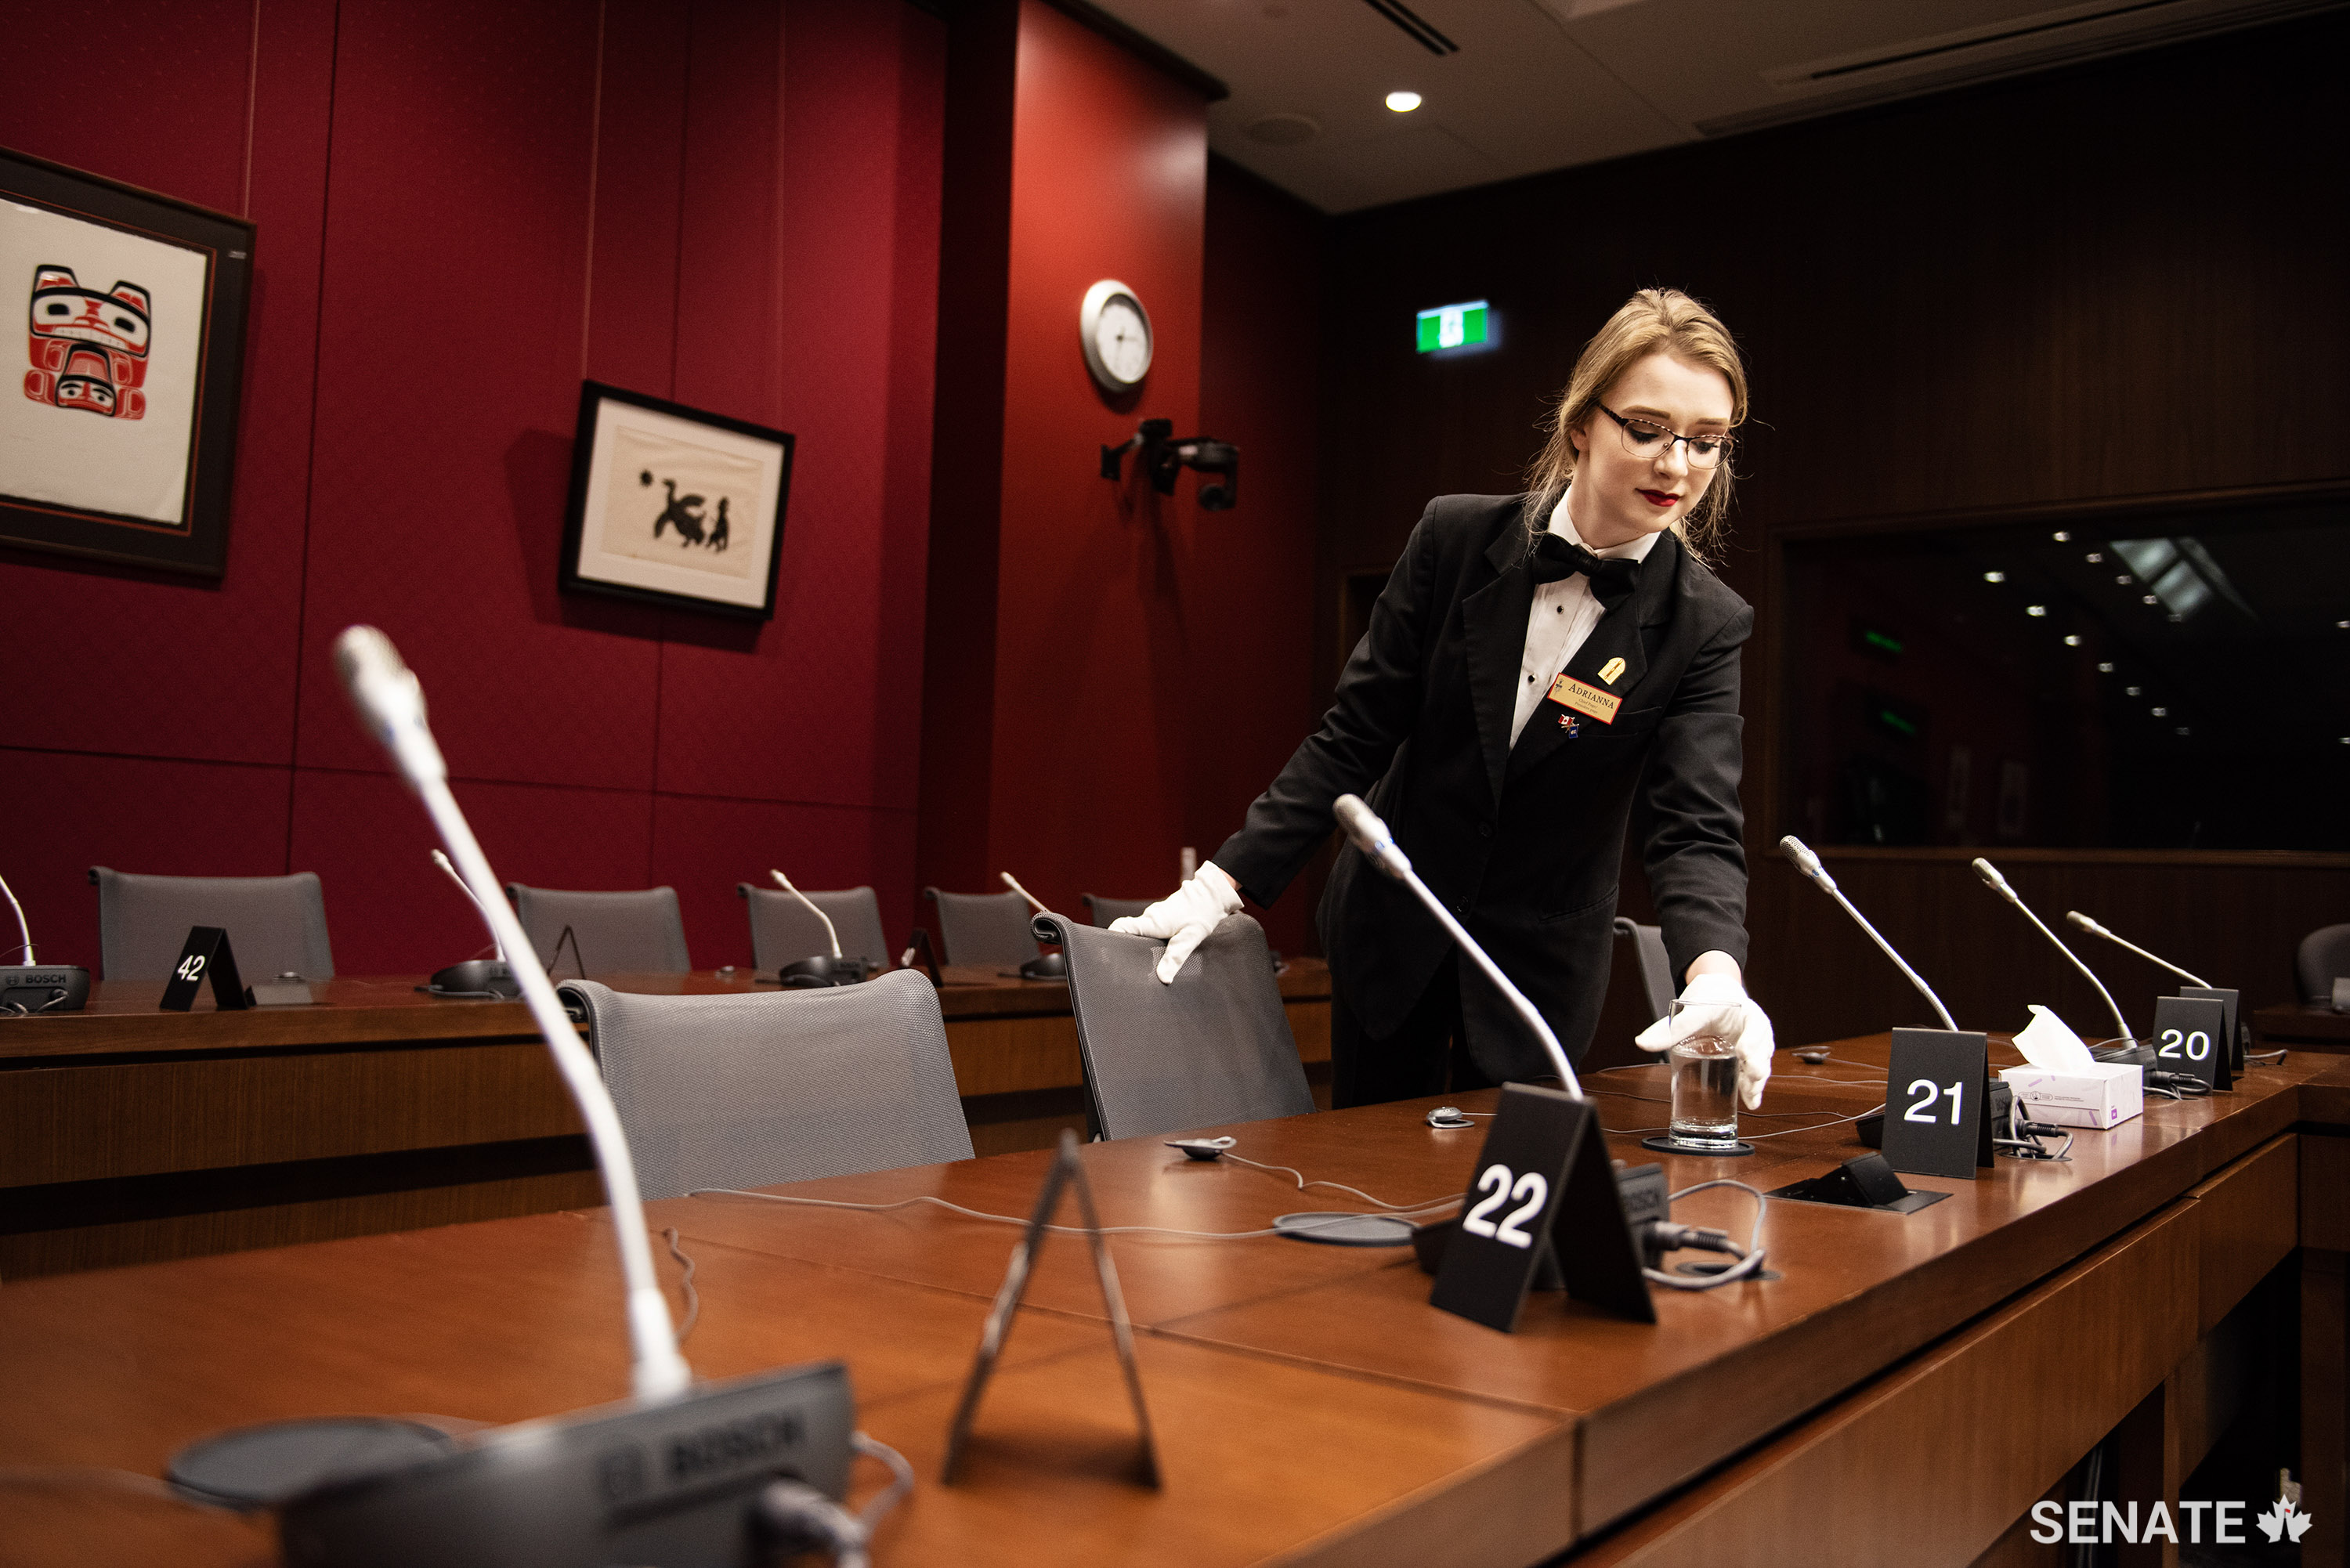 In her first year as a page, Adrianna McAllister, 20, witnessed the installation of Governor General Julie Payette in 2017 inside the Senate Chamber — an experience she will never forget.